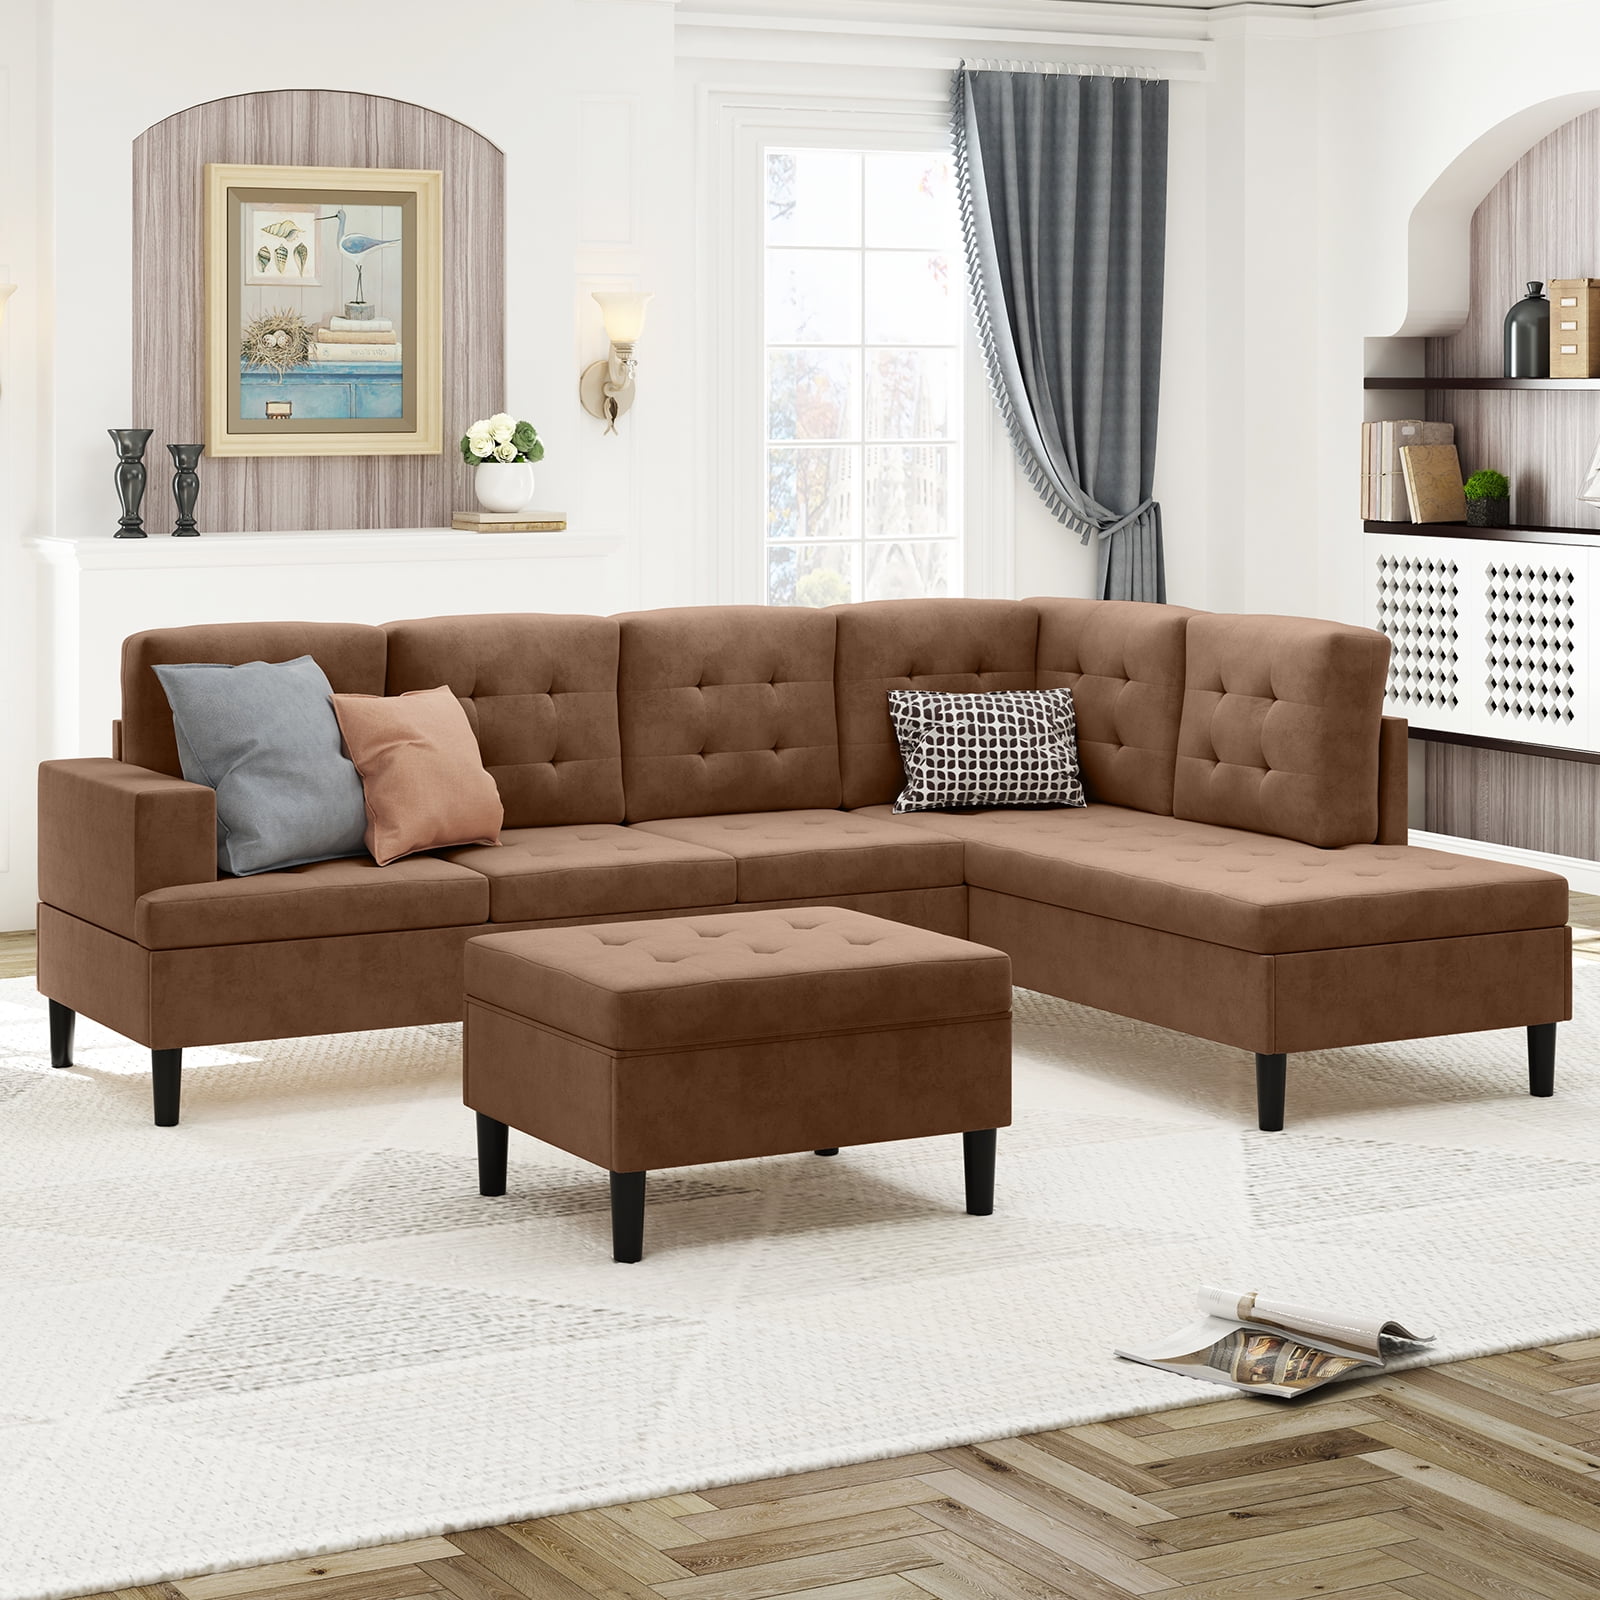 Oversized Sectional Sleeper Sofa Couch